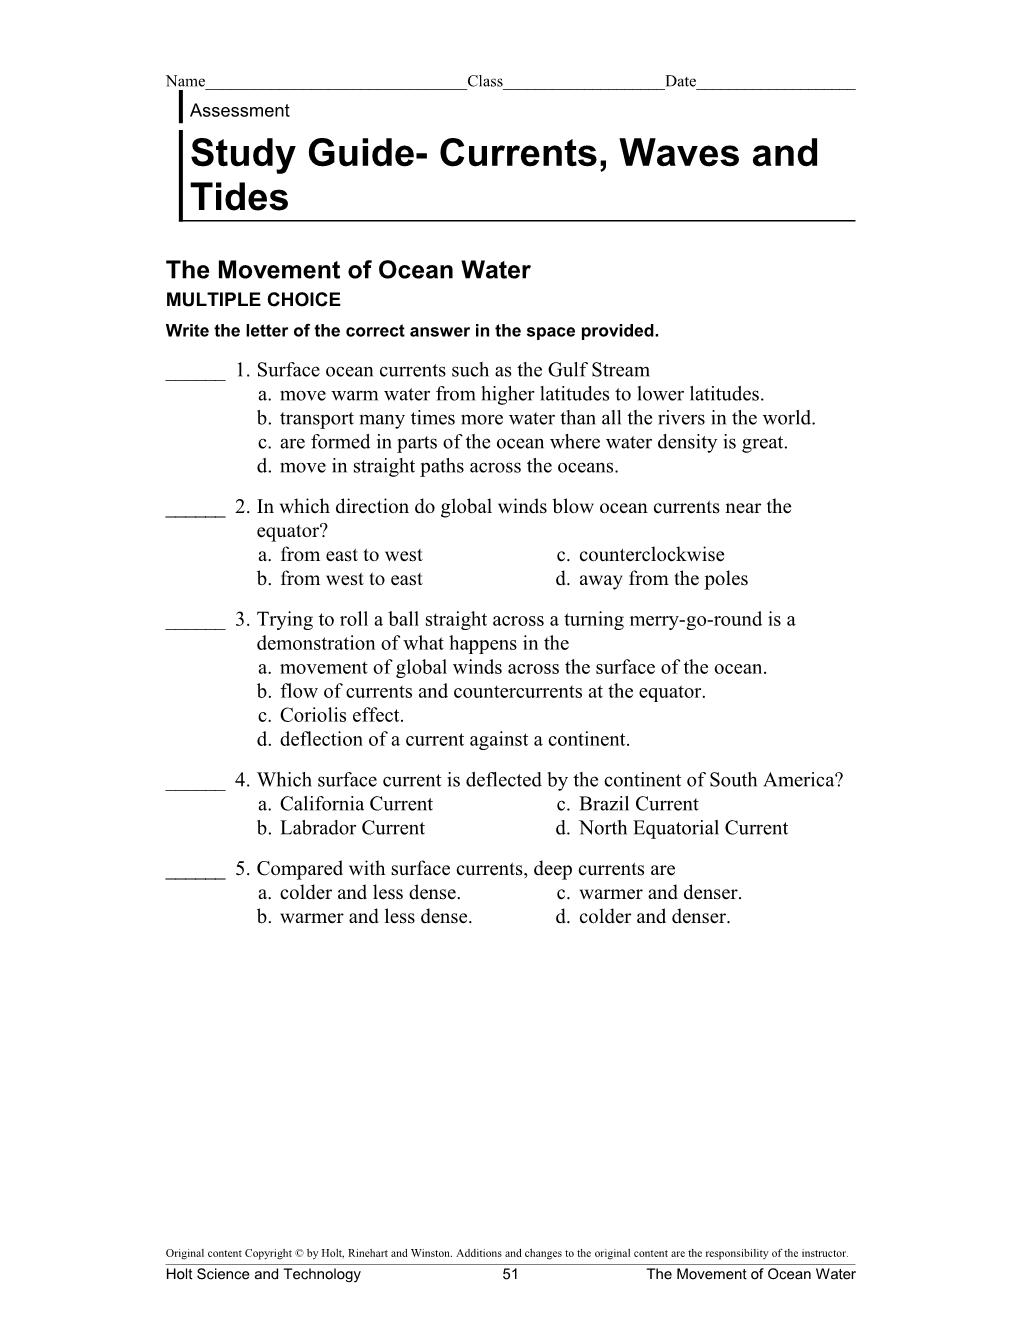 Study Guide- Currents, Waves and Tides